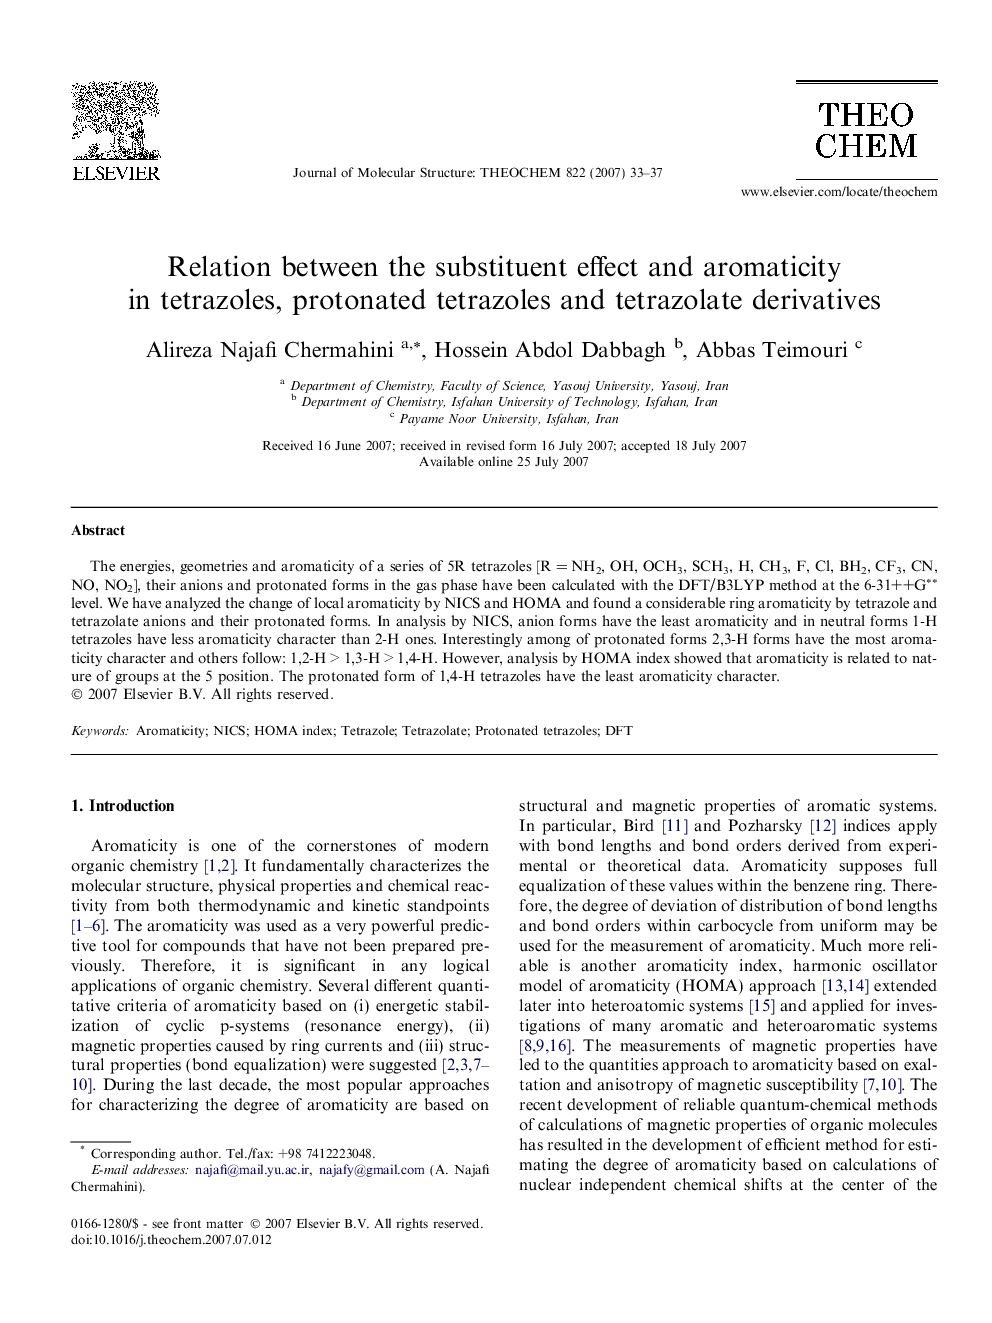 Relation between the substituent effect and aromaticity in tetrazoles, protonated tetrazoles and tetrazolate derivatives